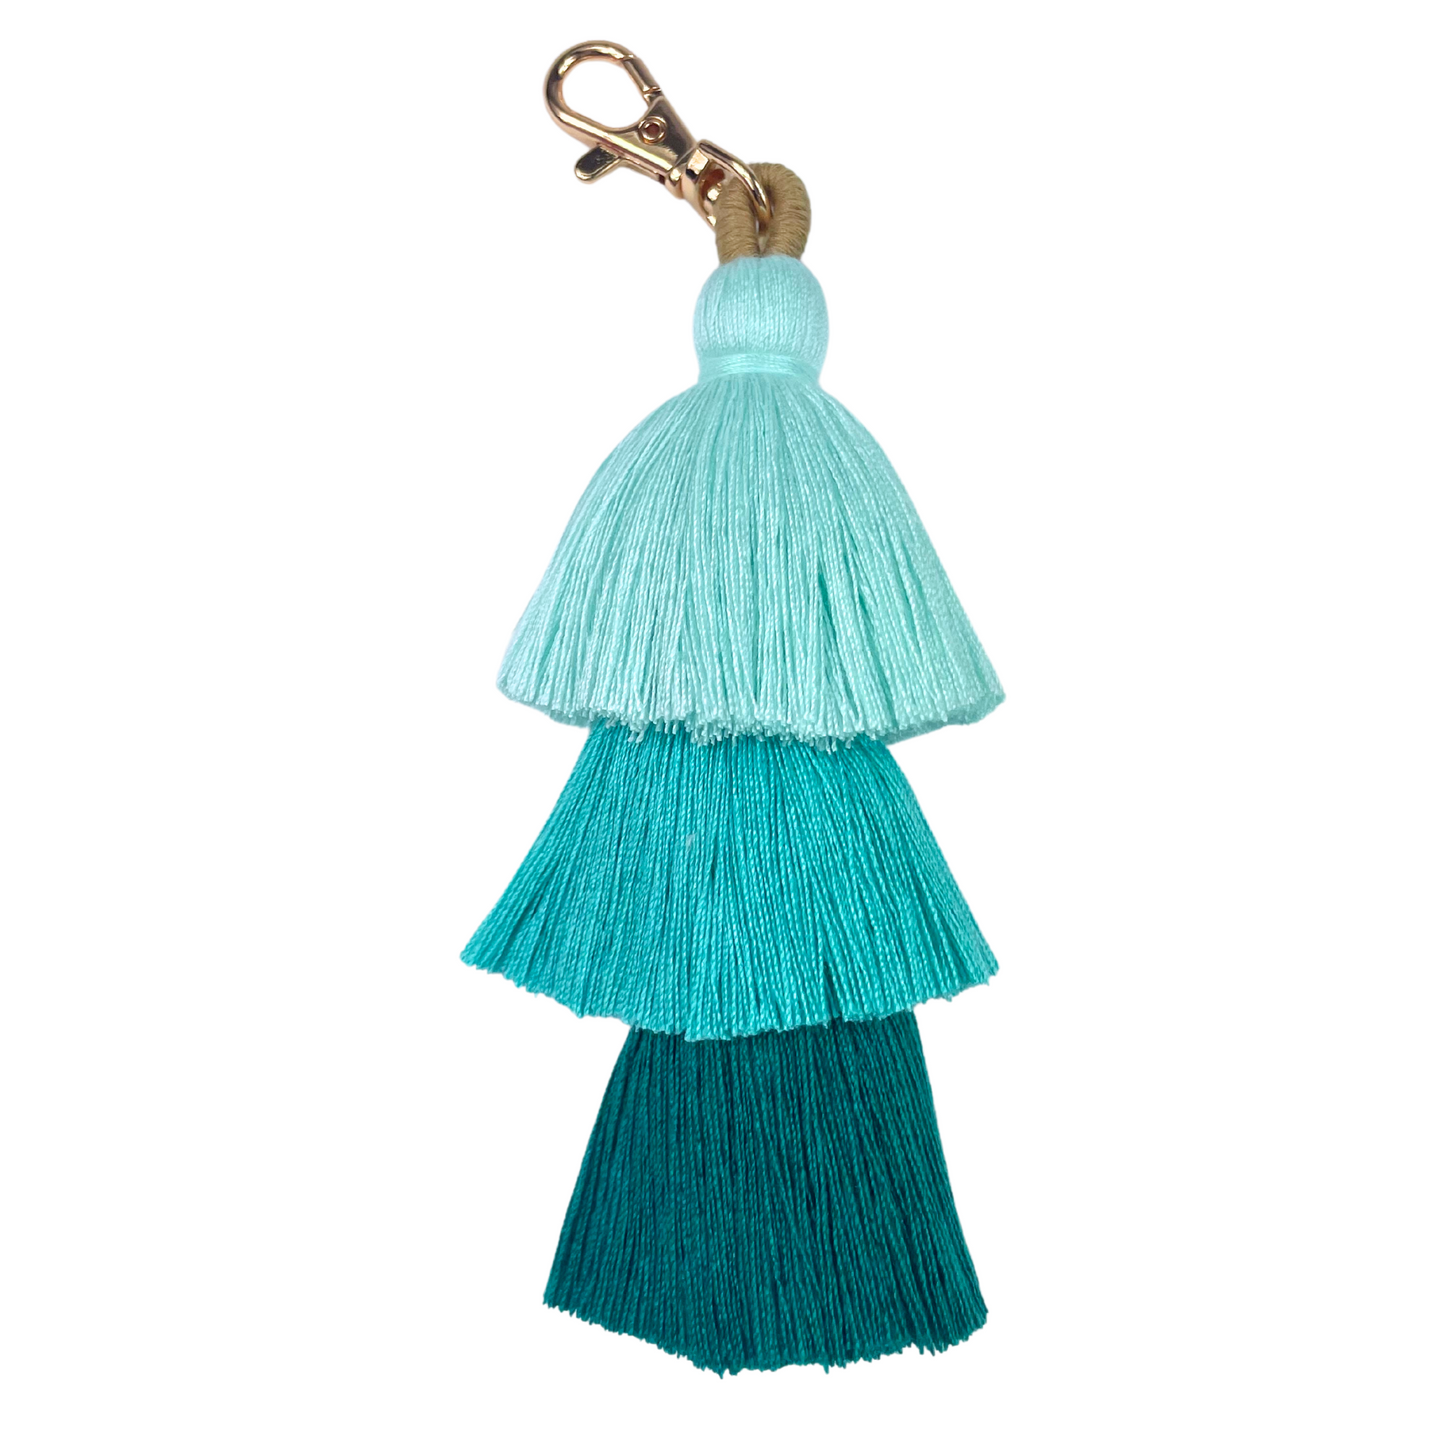 Green and Pink Tile Bag Tassle-  Key Chain with Three shades of Green- Aqua, Turquoise, Teal Mahjong g Tile Carrying Bag Accessory